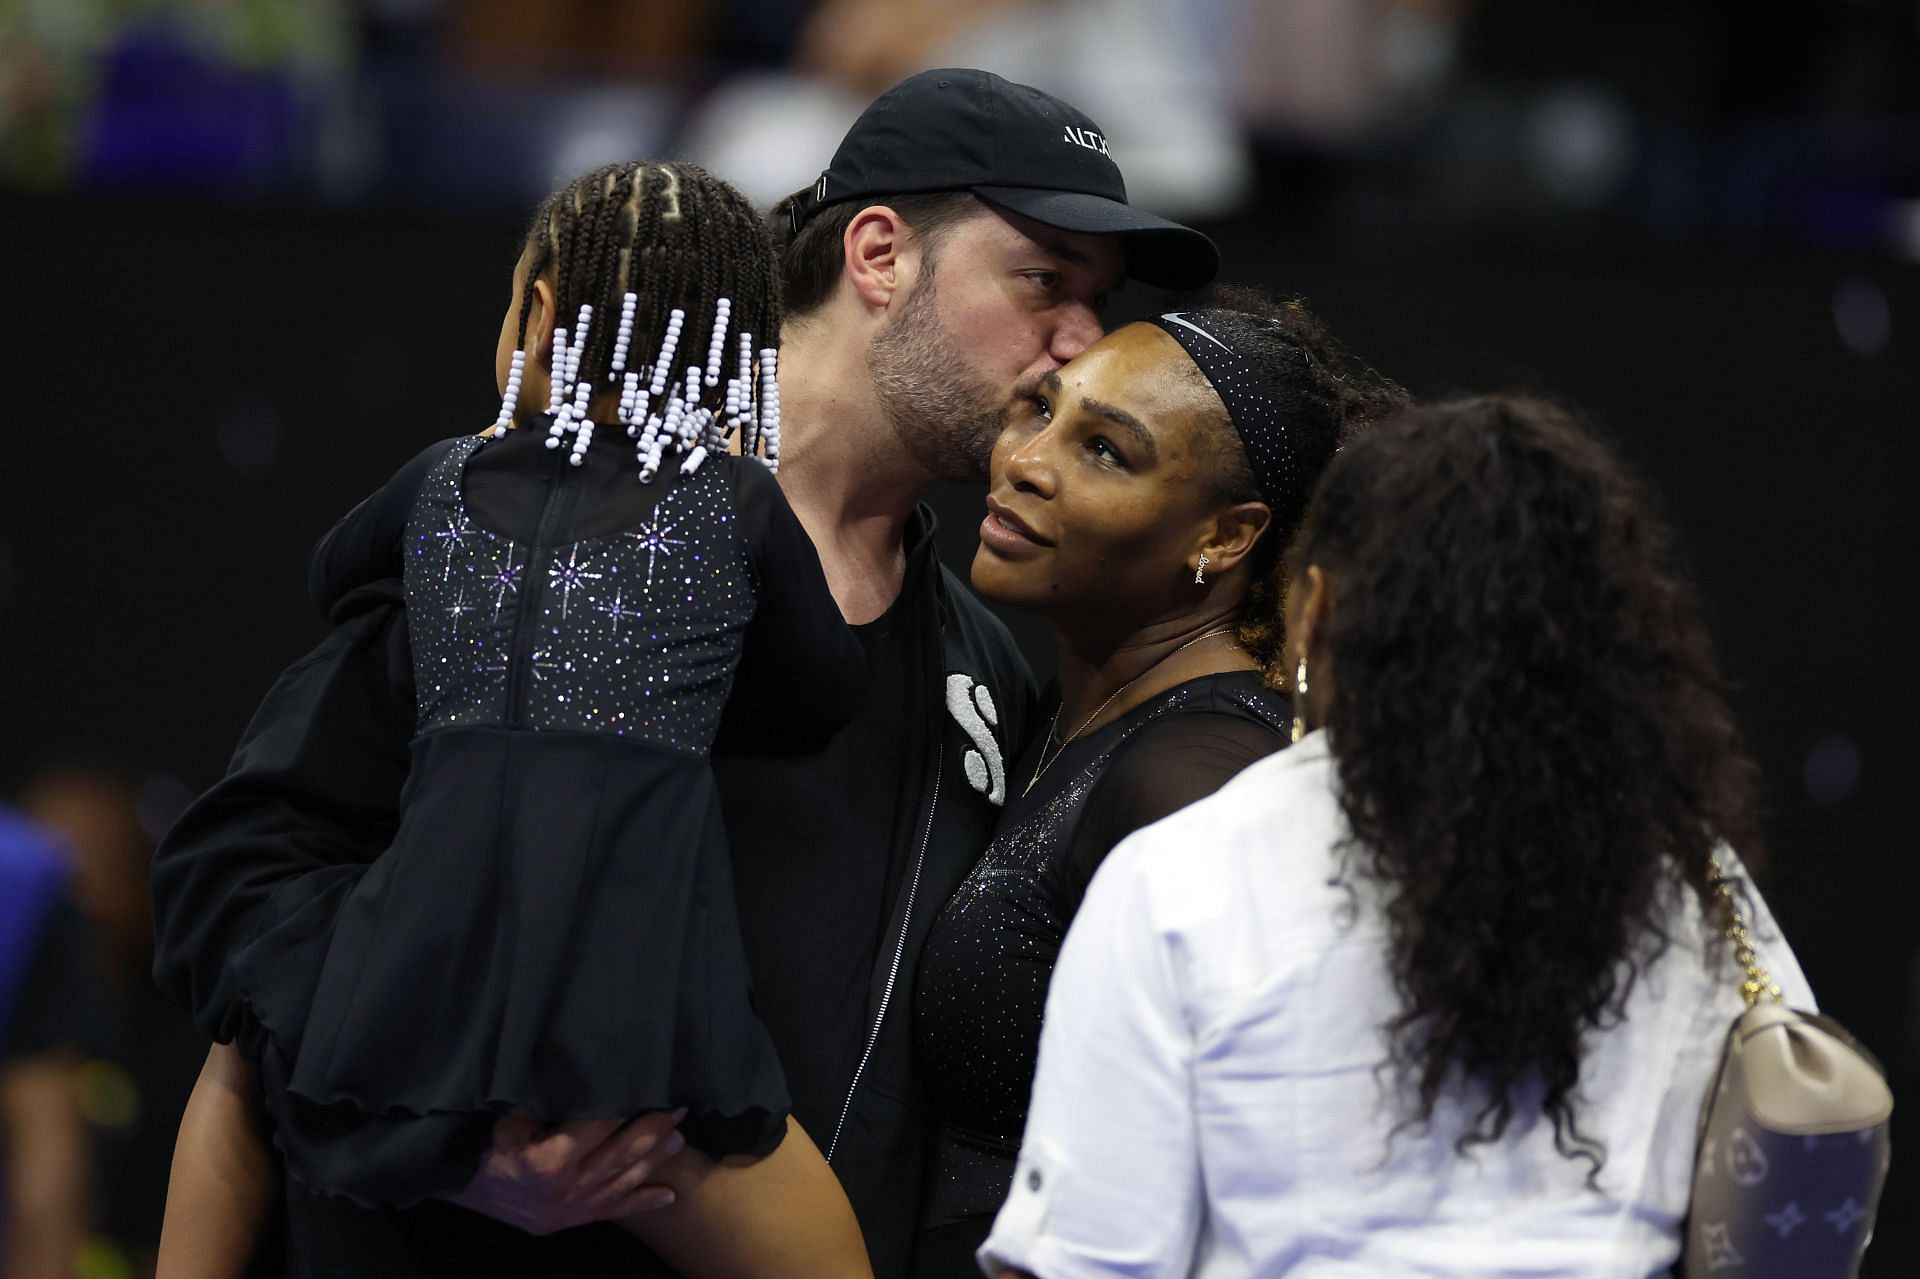 Serena Williams pictured with her husband and daughter at the 2022 US Open - Day 1.